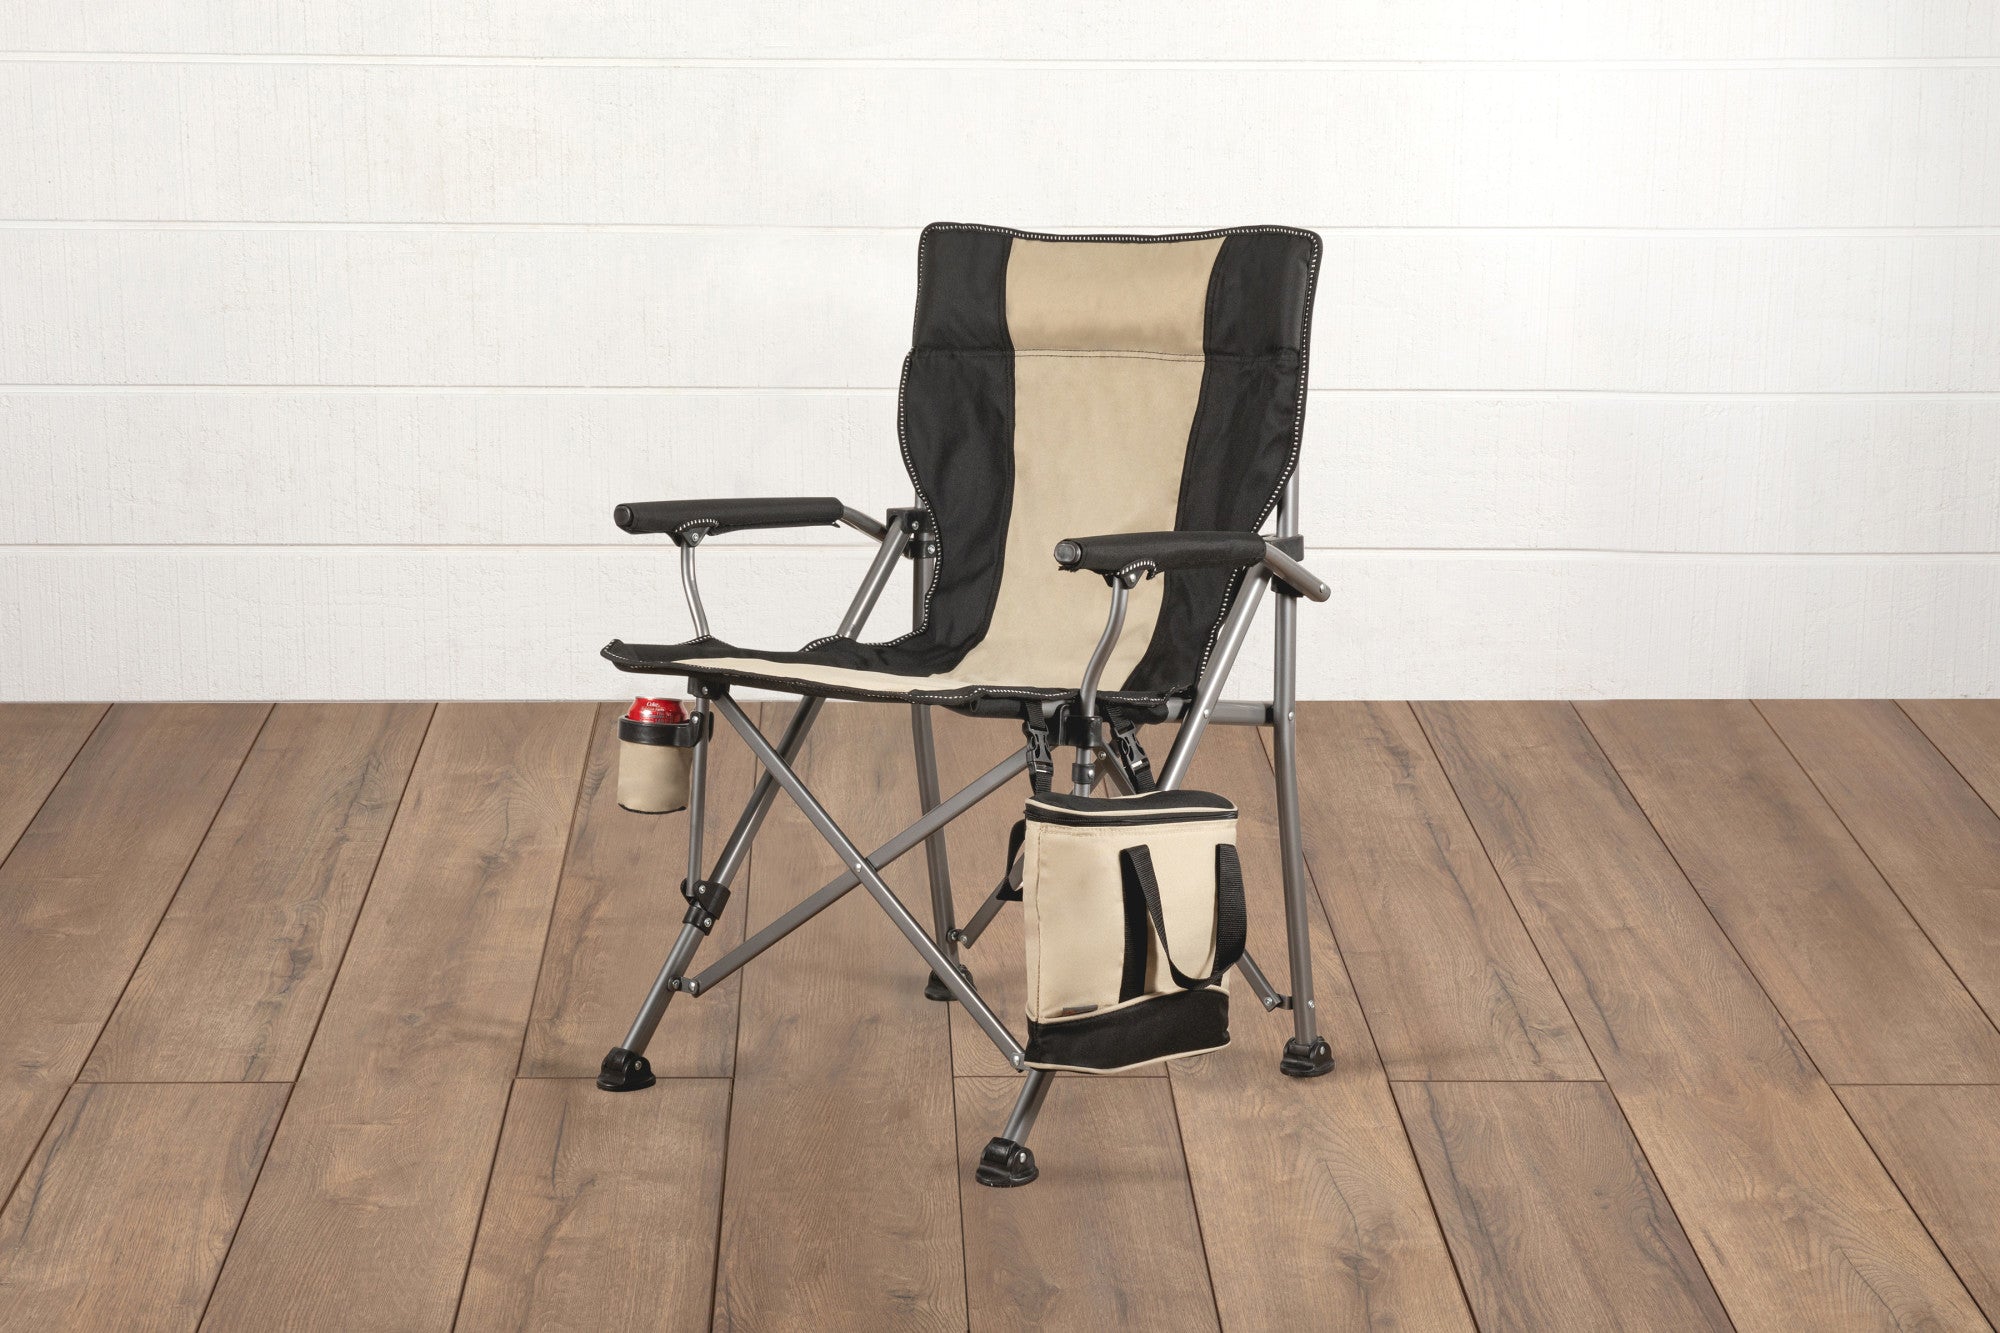 New York Giants - Outlander XL Camping Chair with Cooler